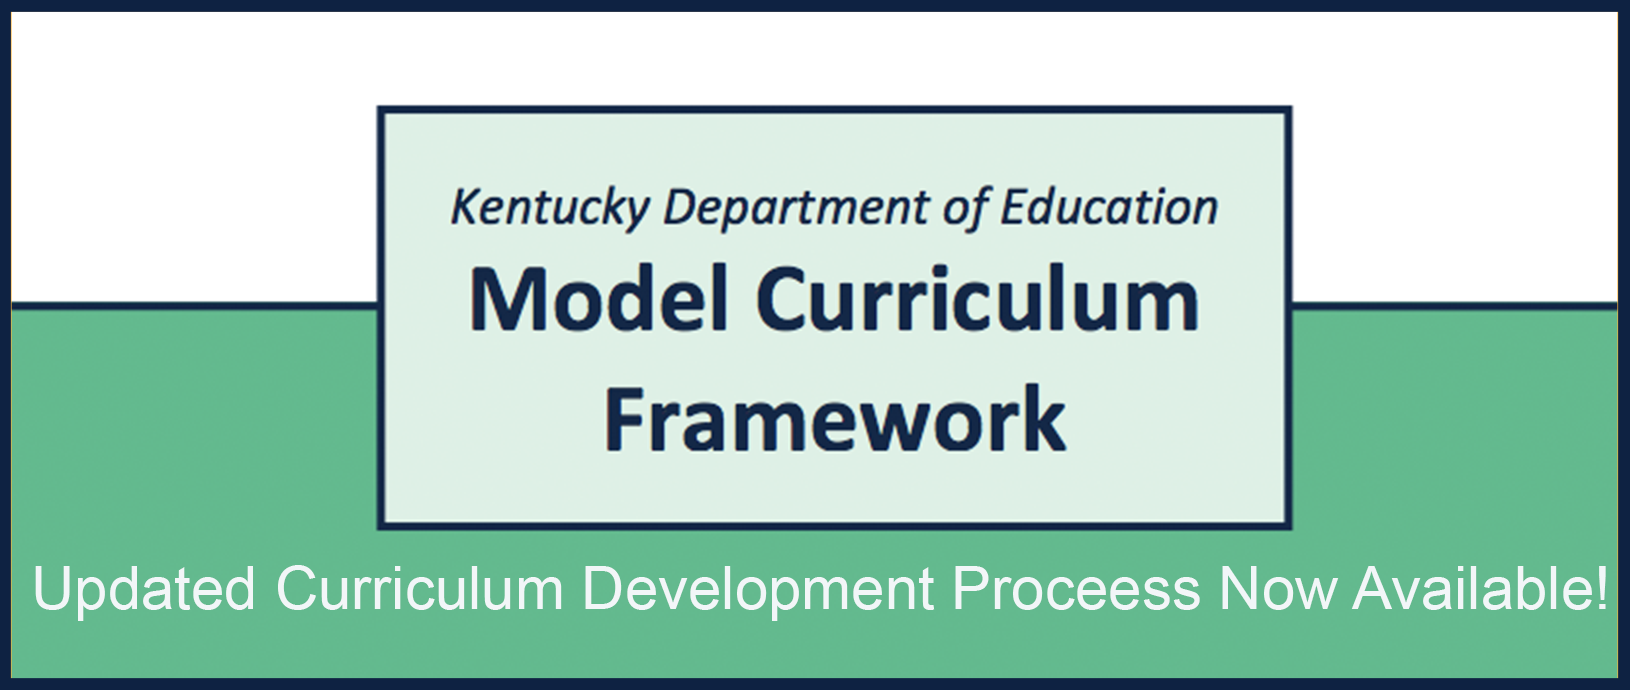 Updated Curriculum Development Process Now Available!